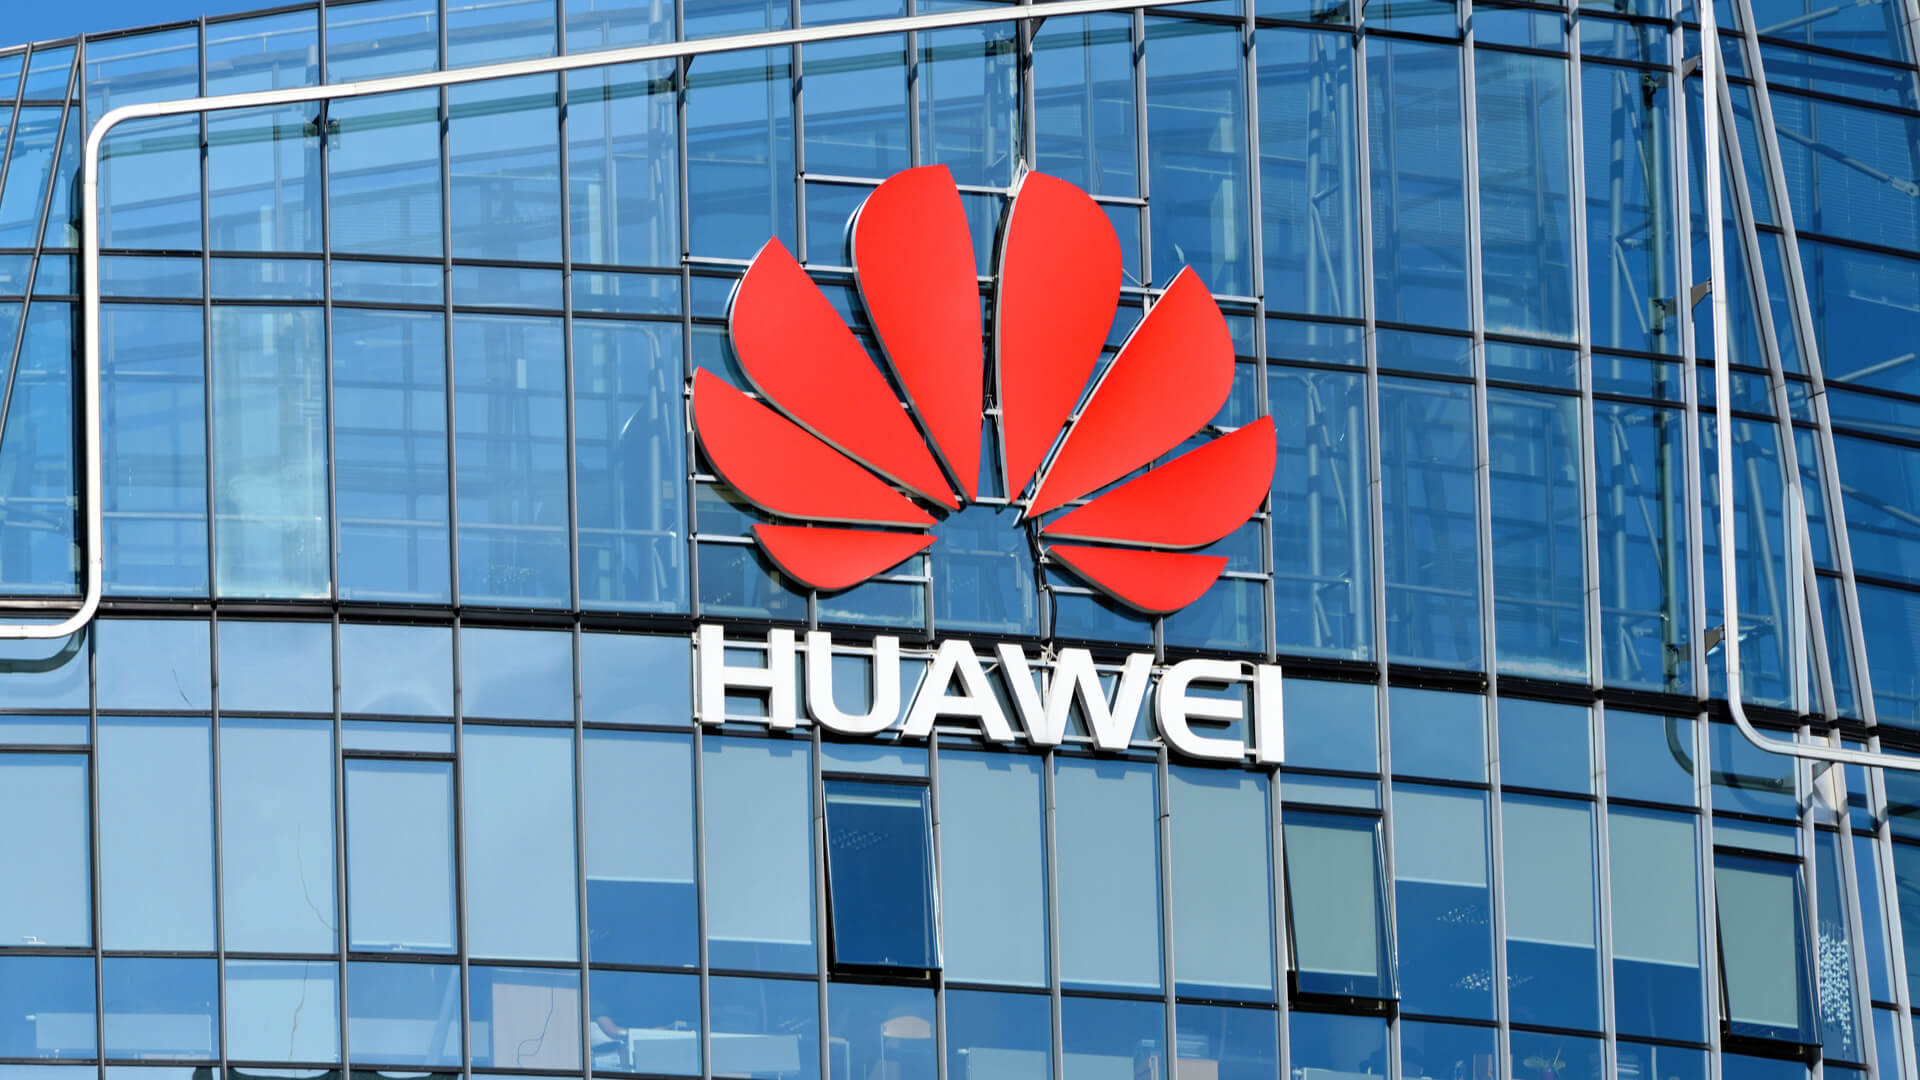 IEEE bans Huawei employees from peer-reviewing and editing papers